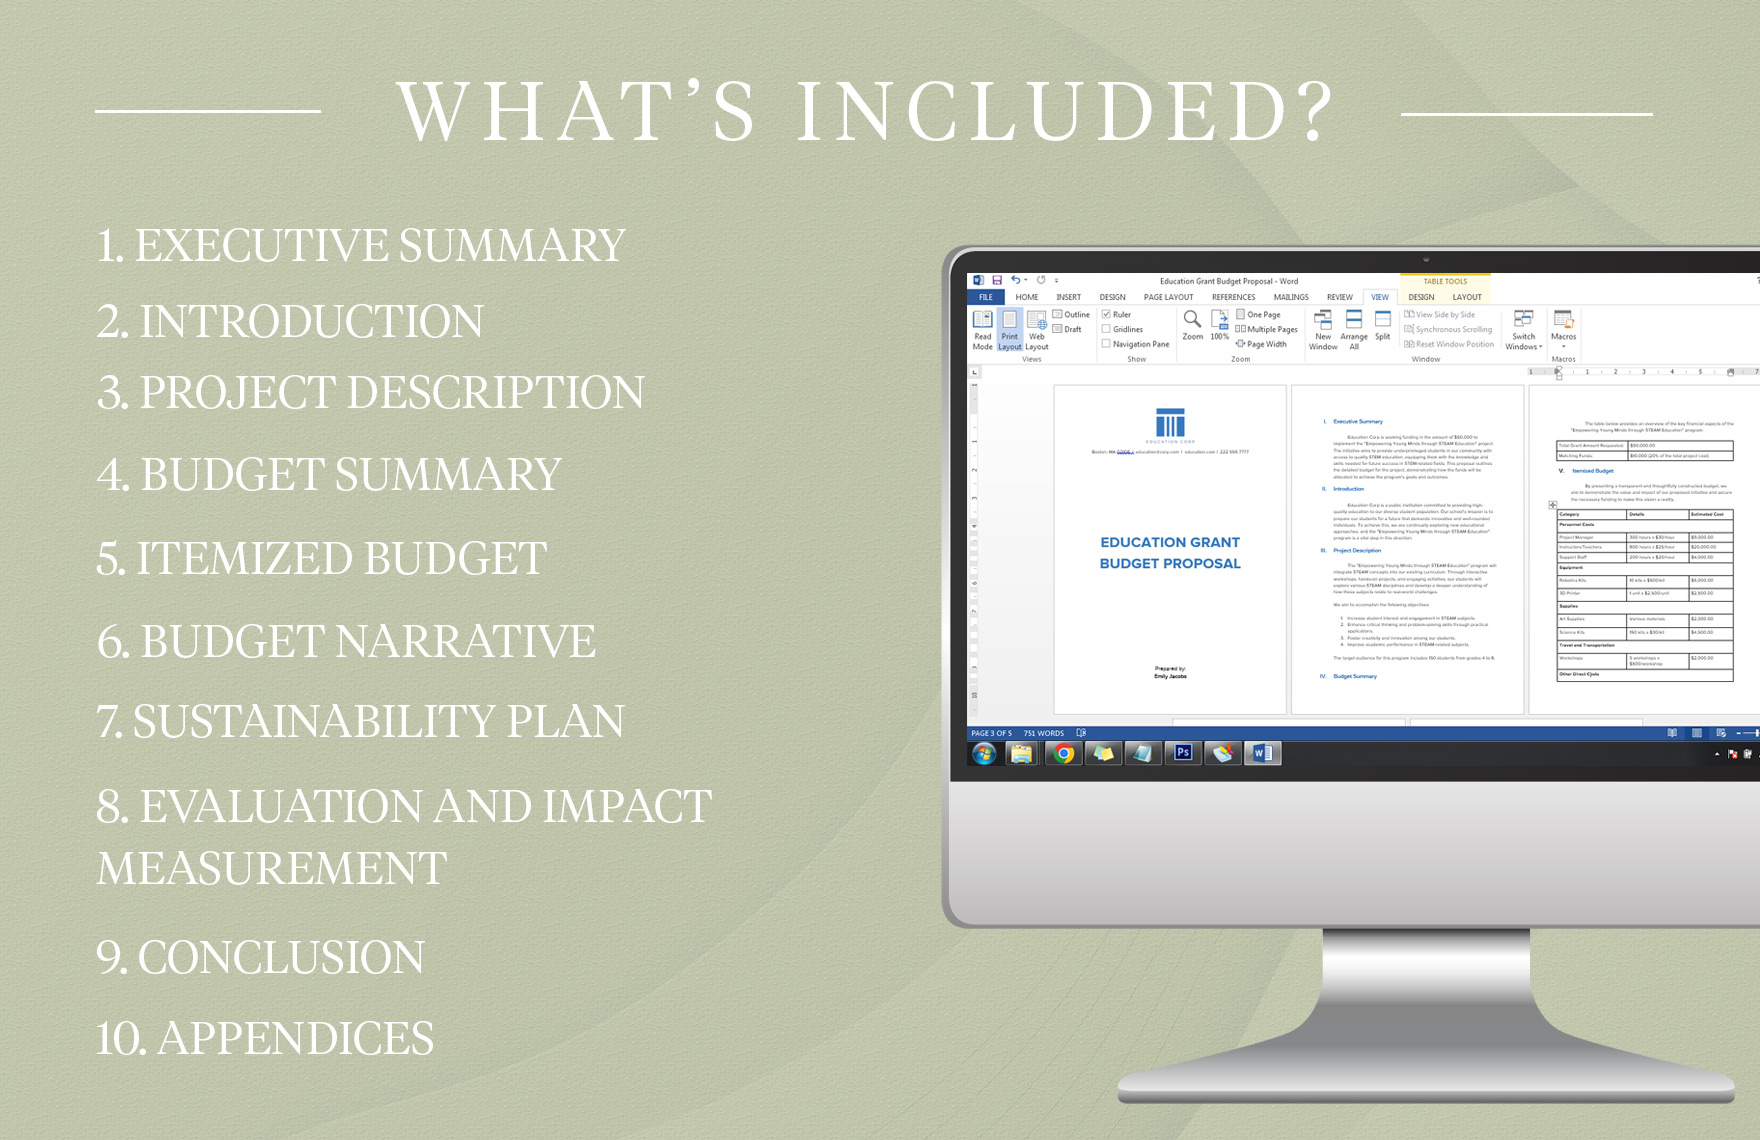 Education Grant Budget Proposal Template